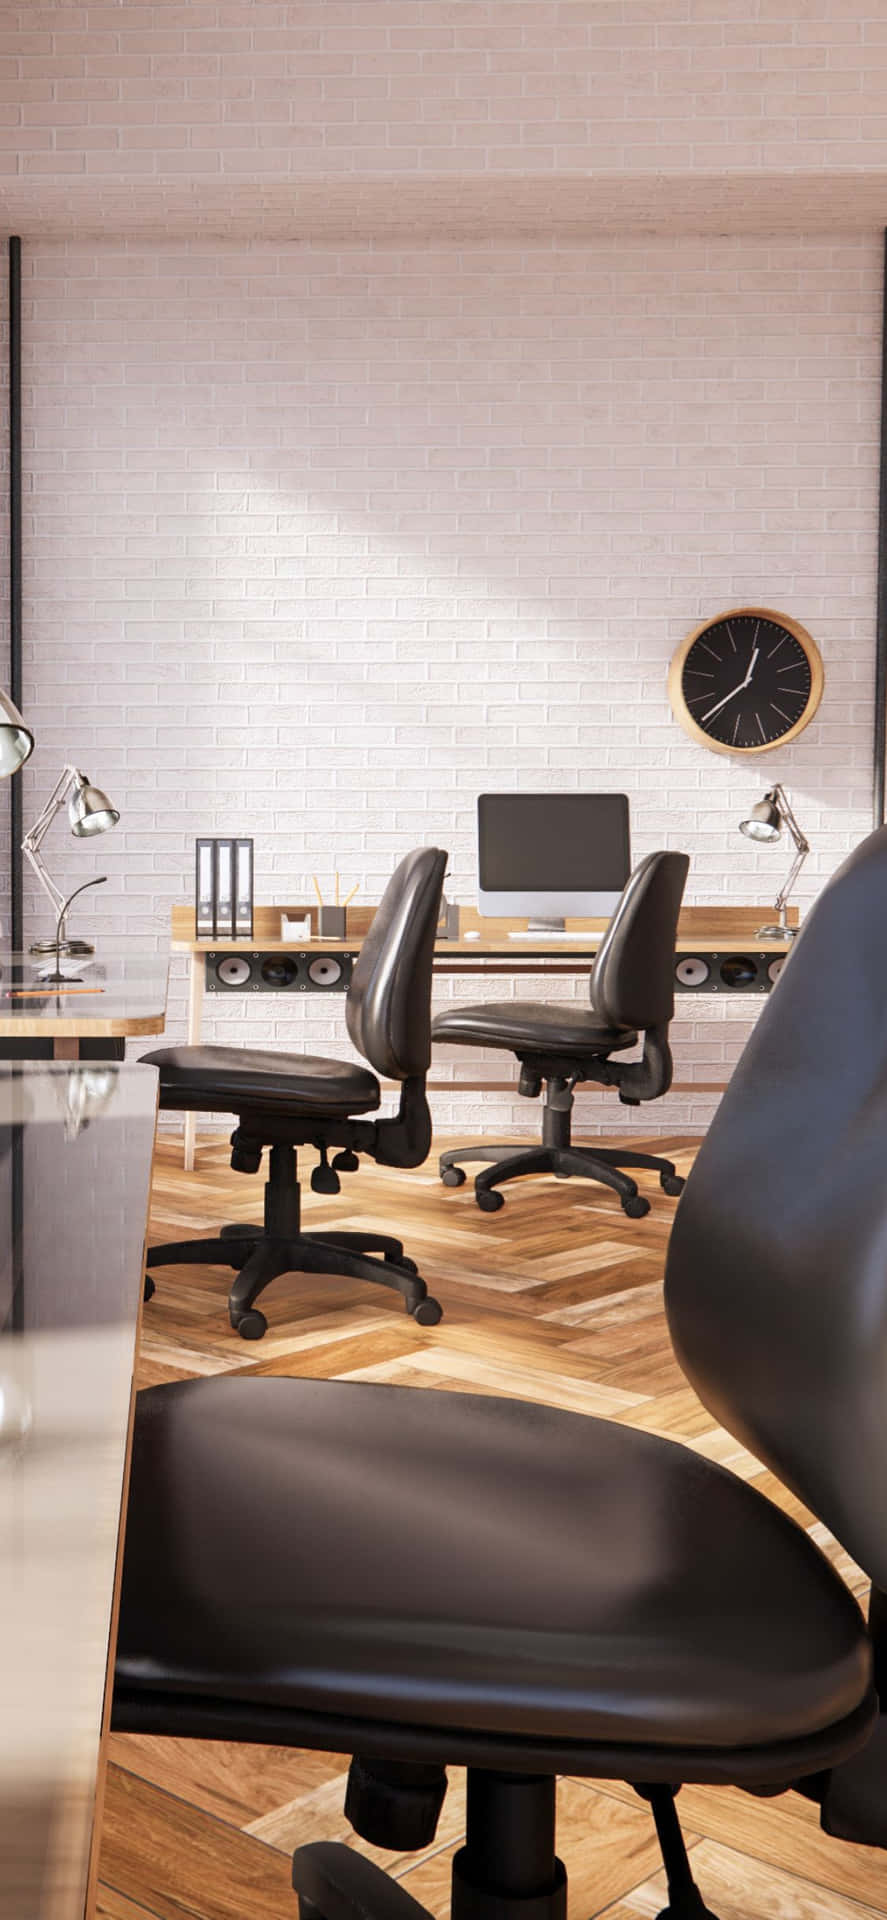 iPhone XS Office Black Chairs Background